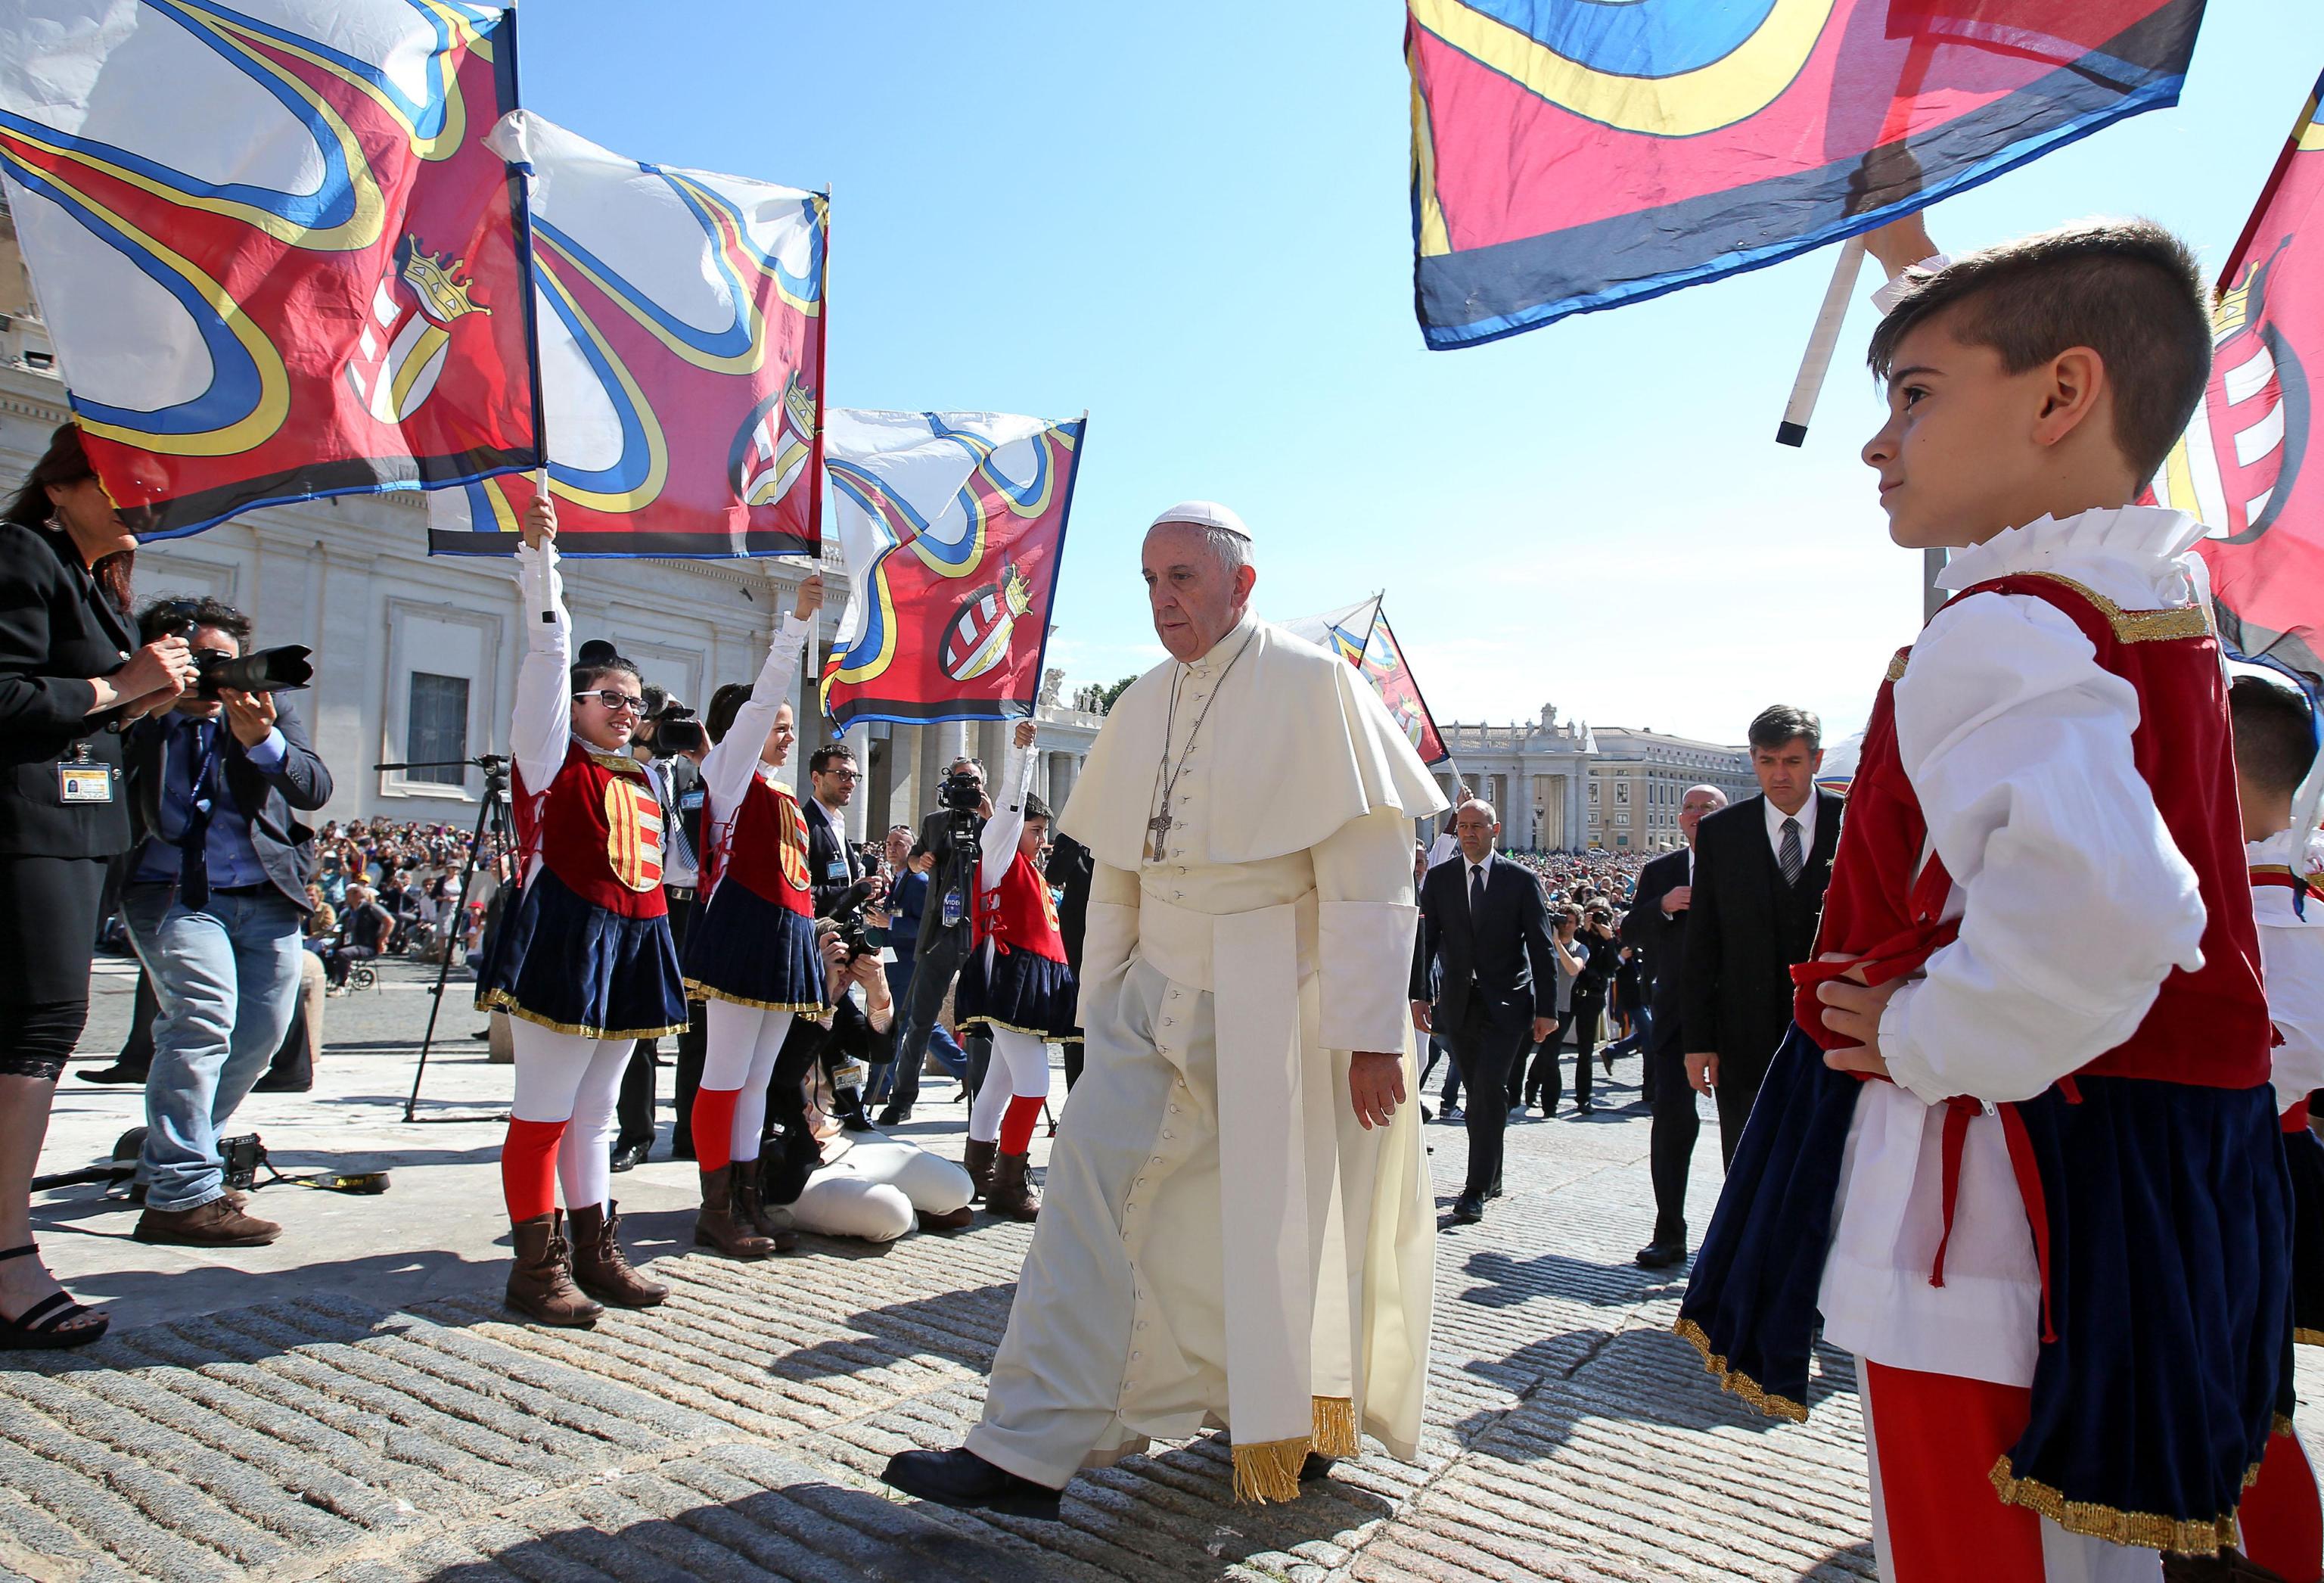 Pope Francis arrives for his weekly general audience in St. Peter's Square